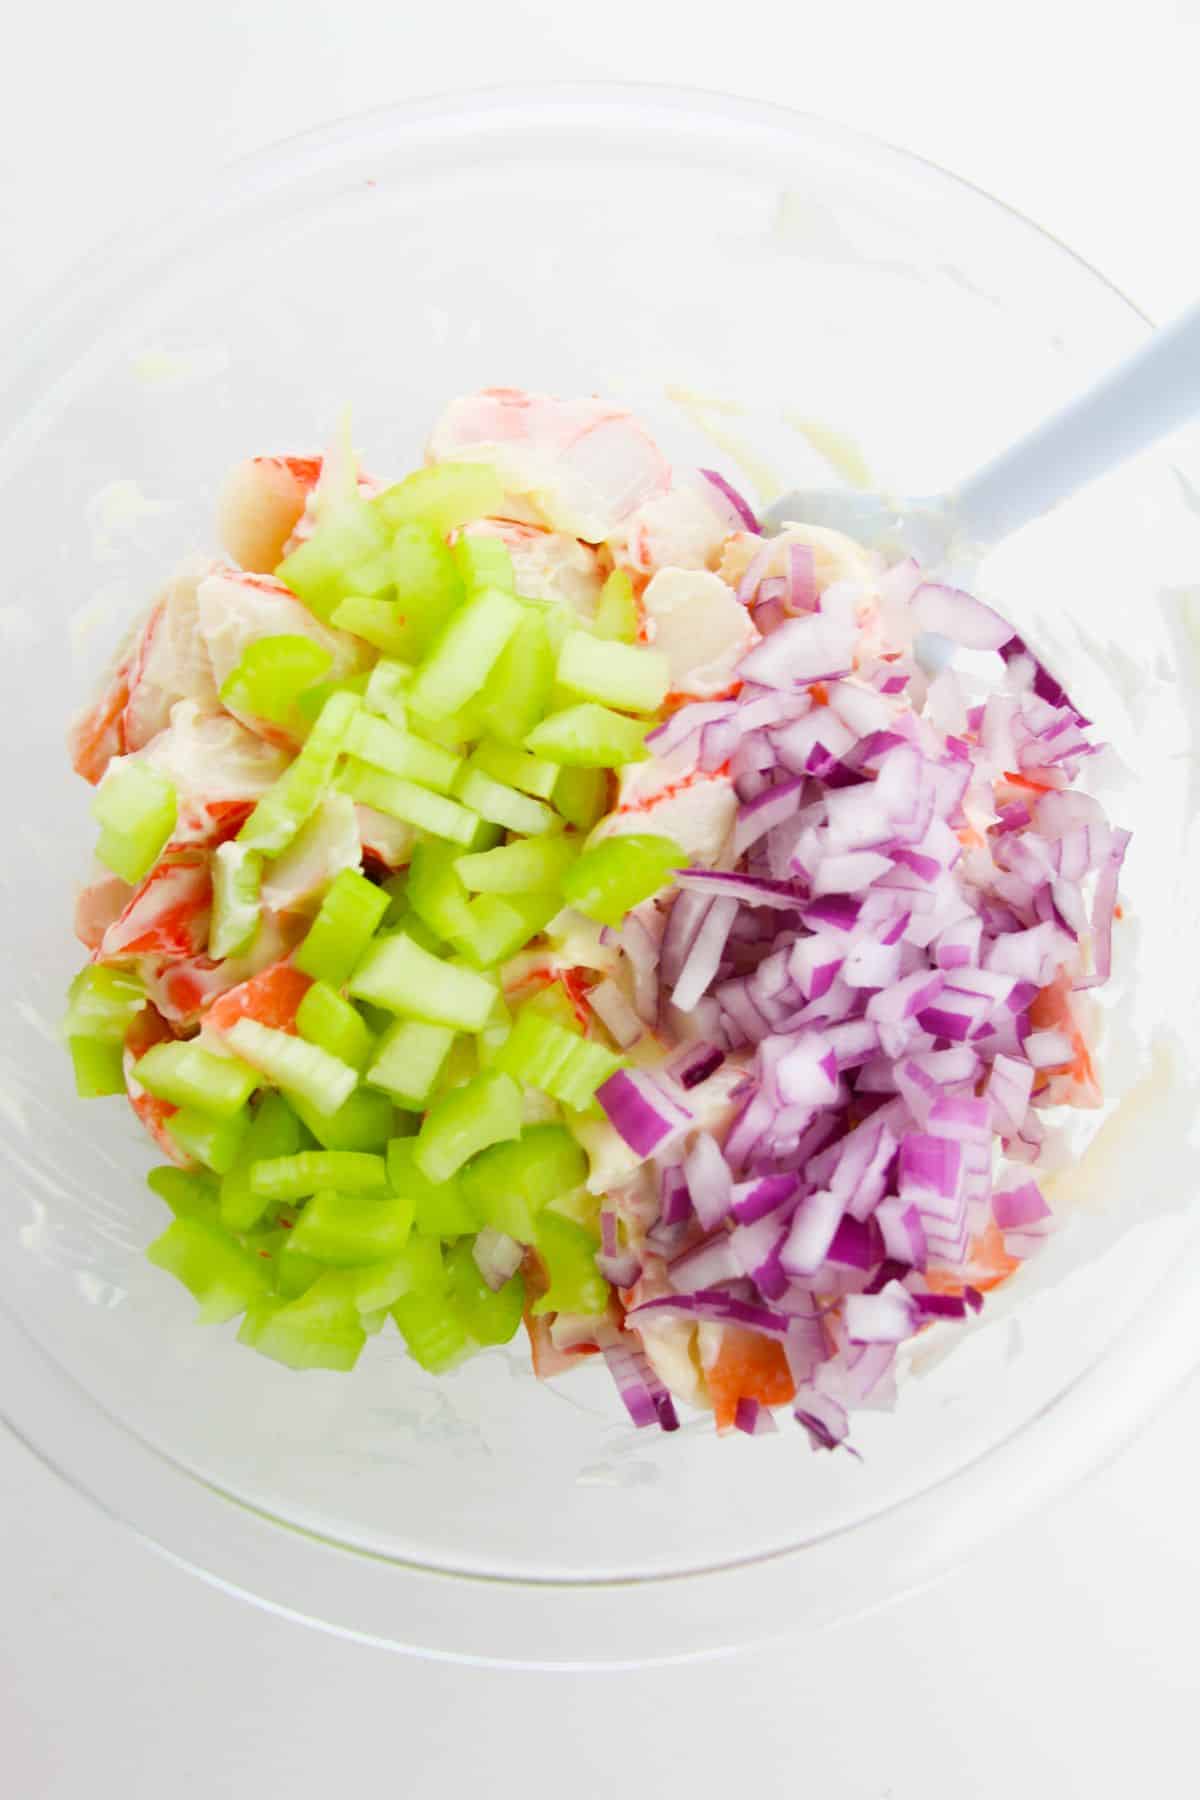 diced red onion and celery are added to the crab mixture. spatula on the side.